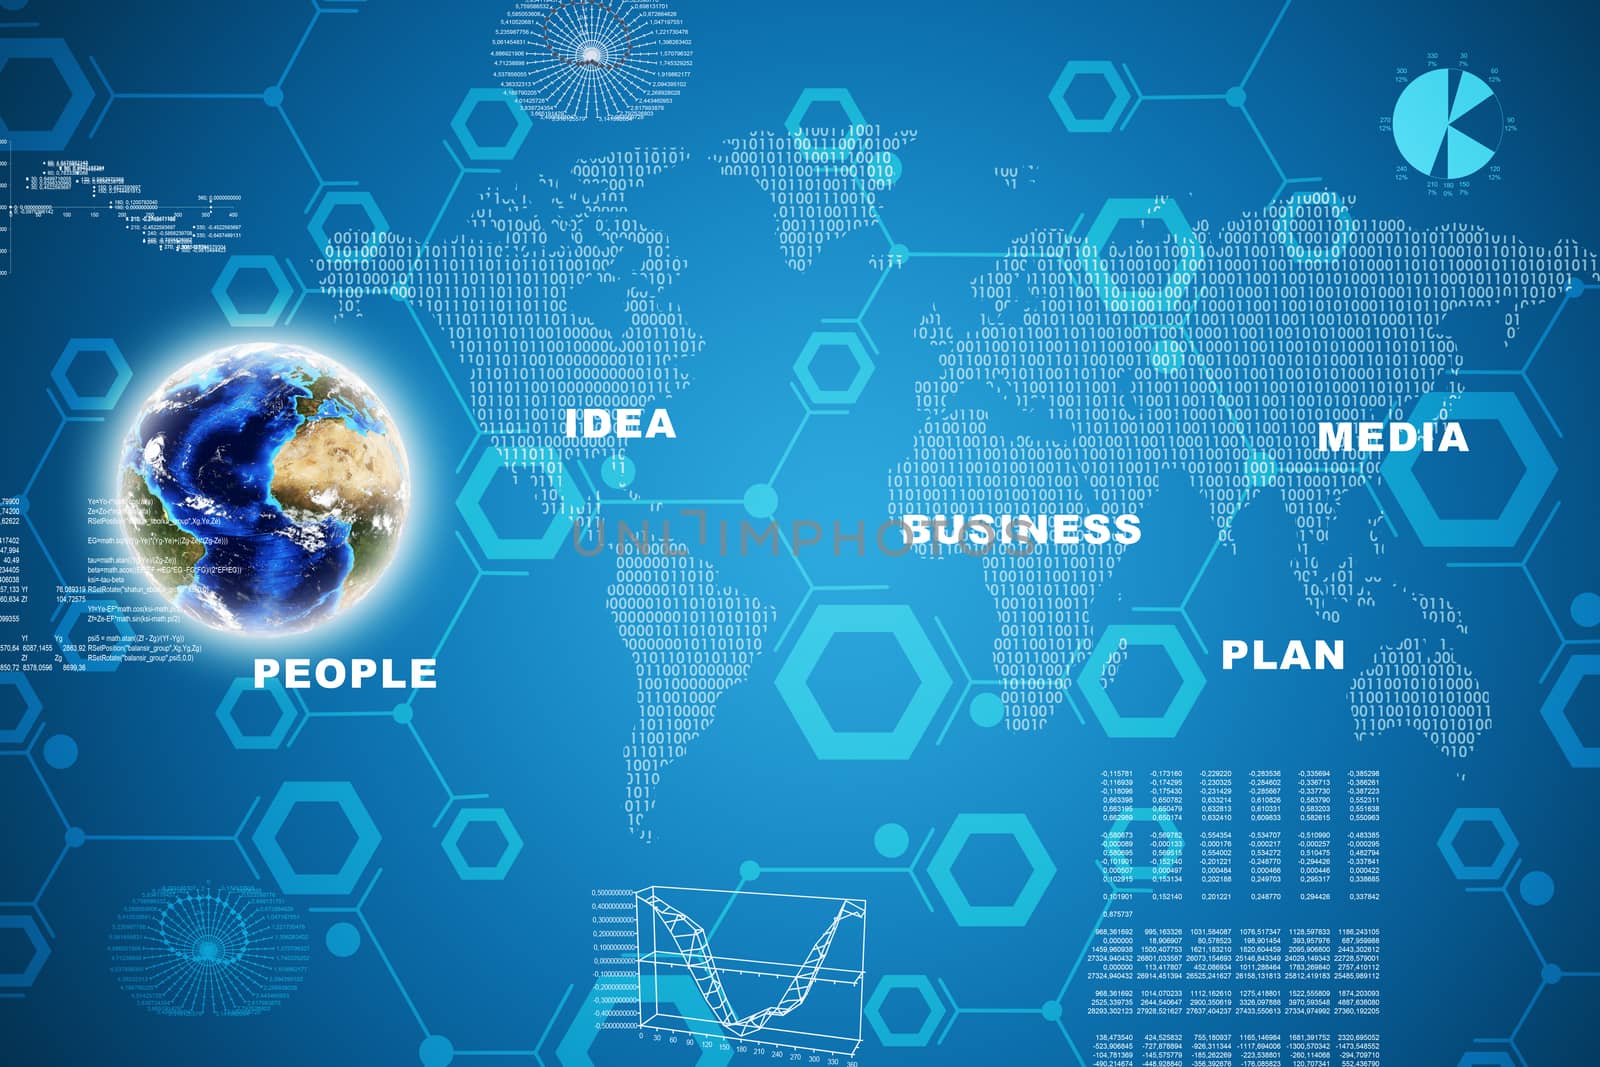 Earth with circles and business words on abstract blue background. Elements of this image furnished by NASA